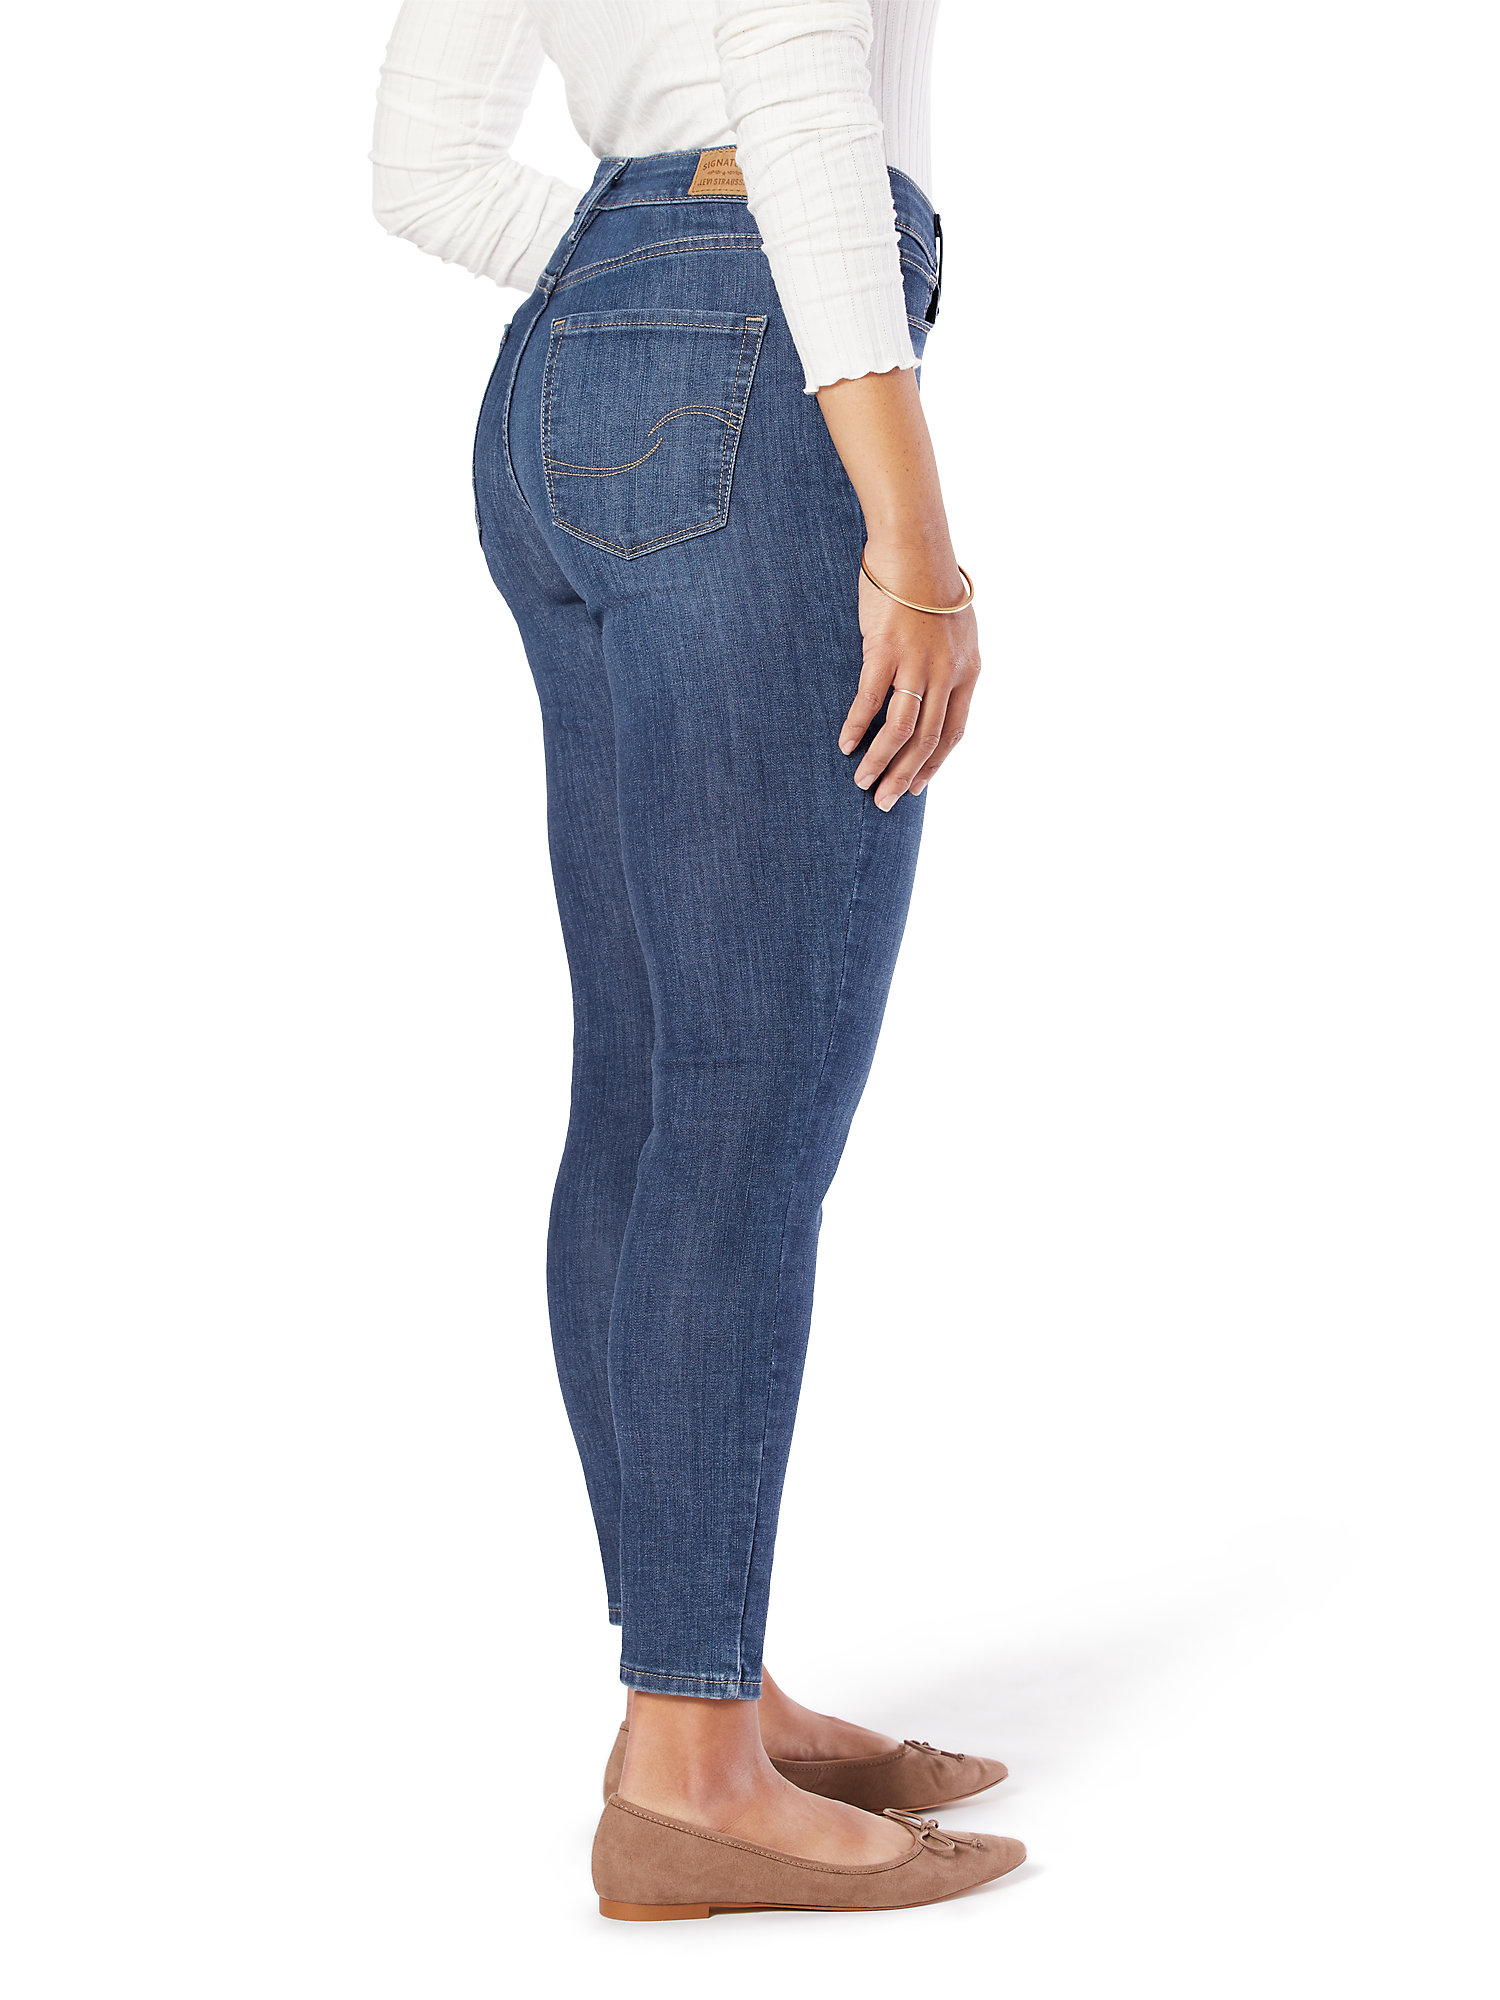 Signature by Levi Strauss & Co. Women's Simply Stretch Shaping High Rise Skinny Ankle Jeans - image 3 of 3